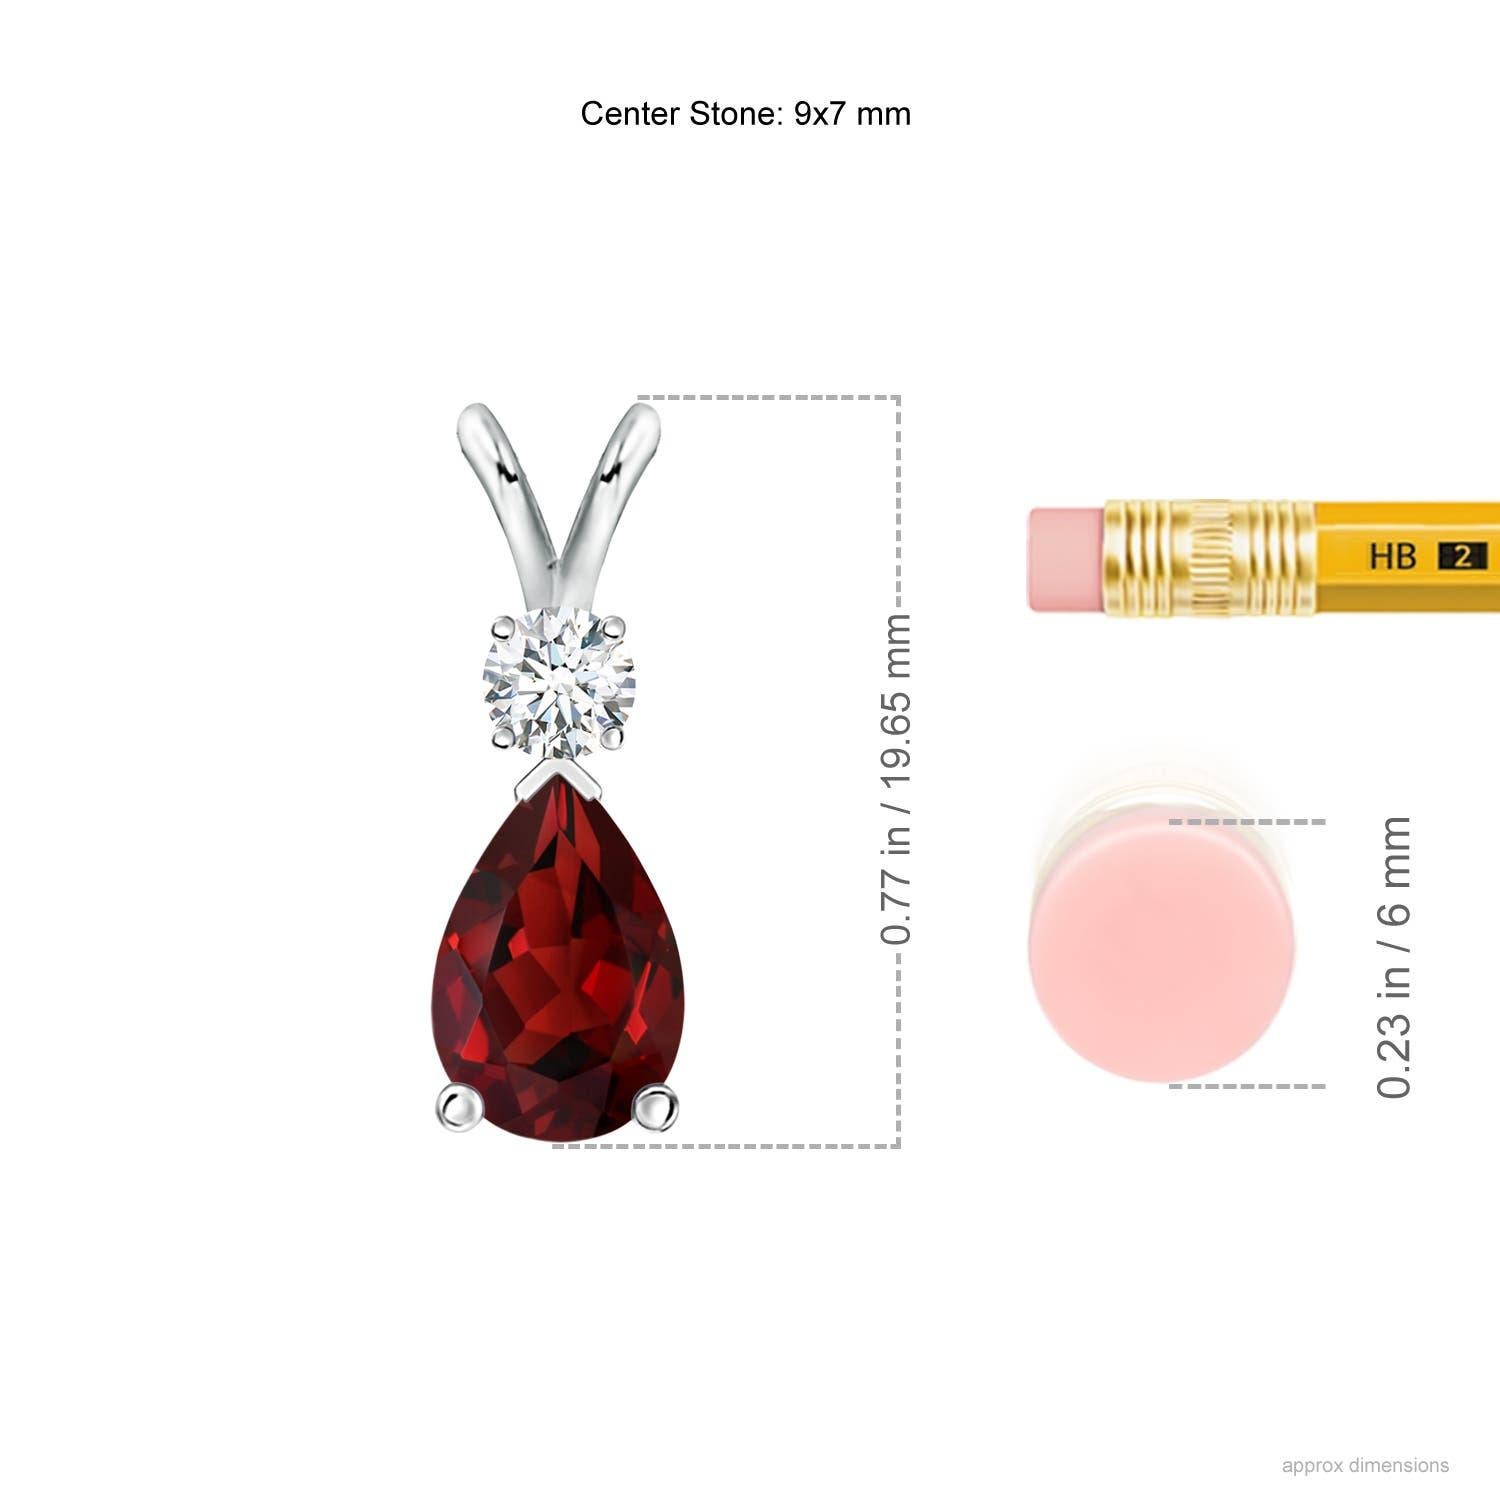 A pear-shaped intense red garnet is secured in a prong setting and embellished with a diamond accent on the top. Simple yet stunning, this teardrop garnet pendant with V bale is sculpted in 14k white gold.